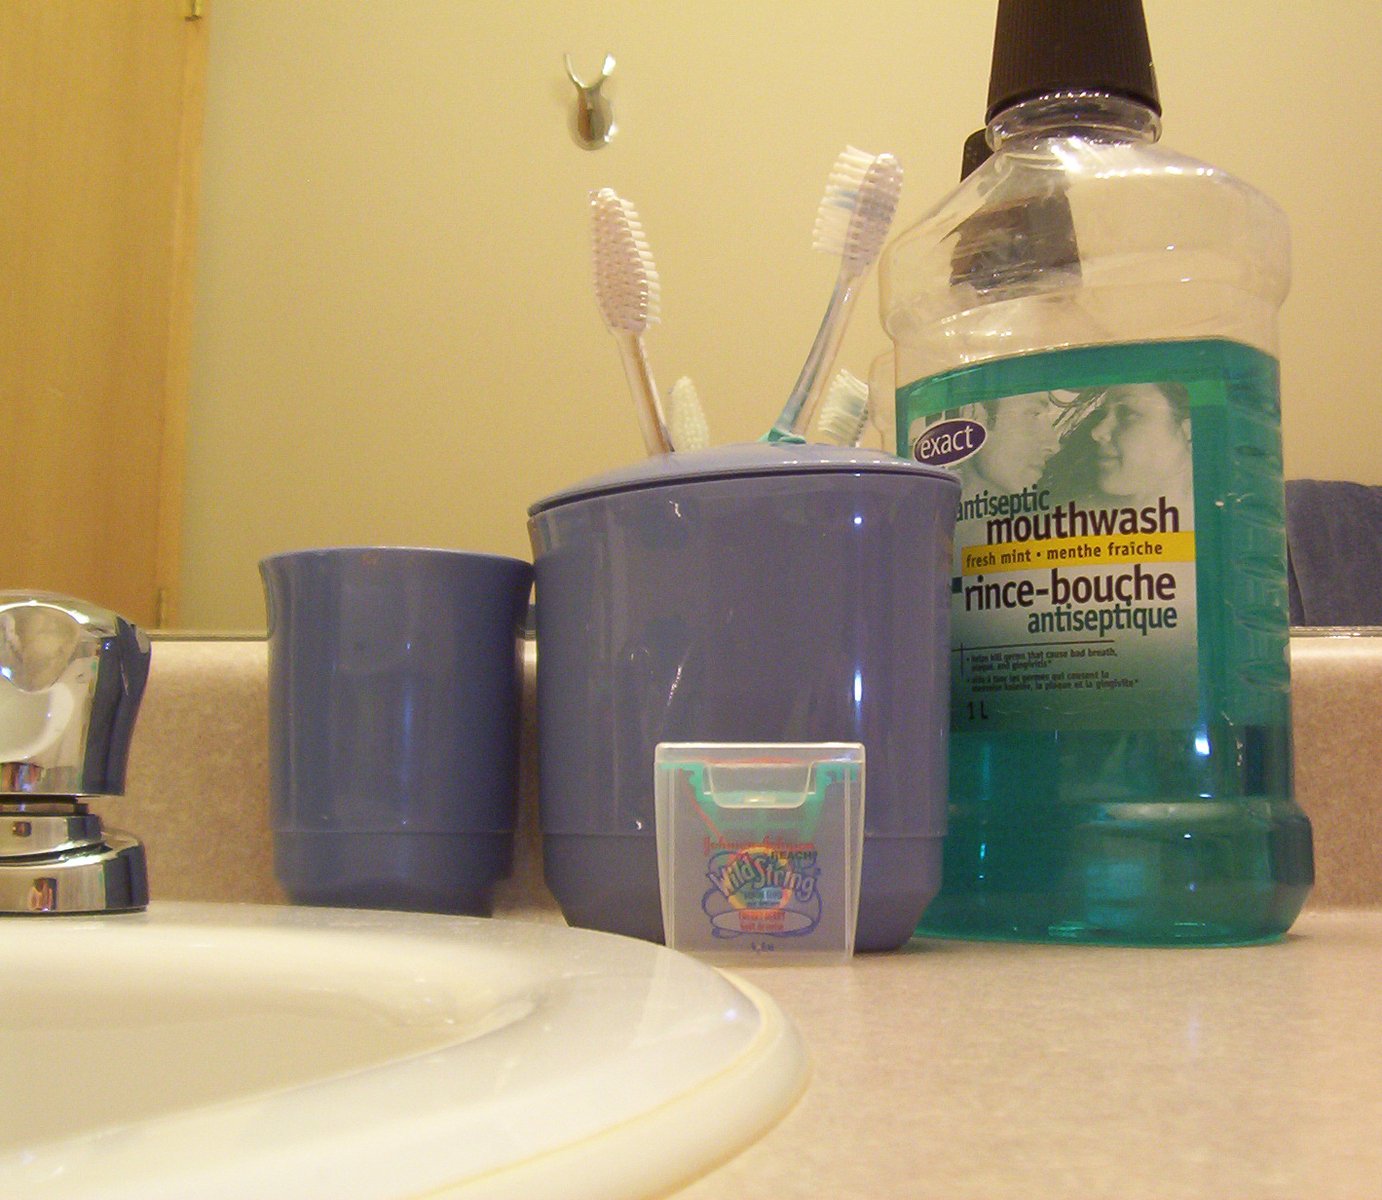 there are many toothpastes and a cup in the bathroom